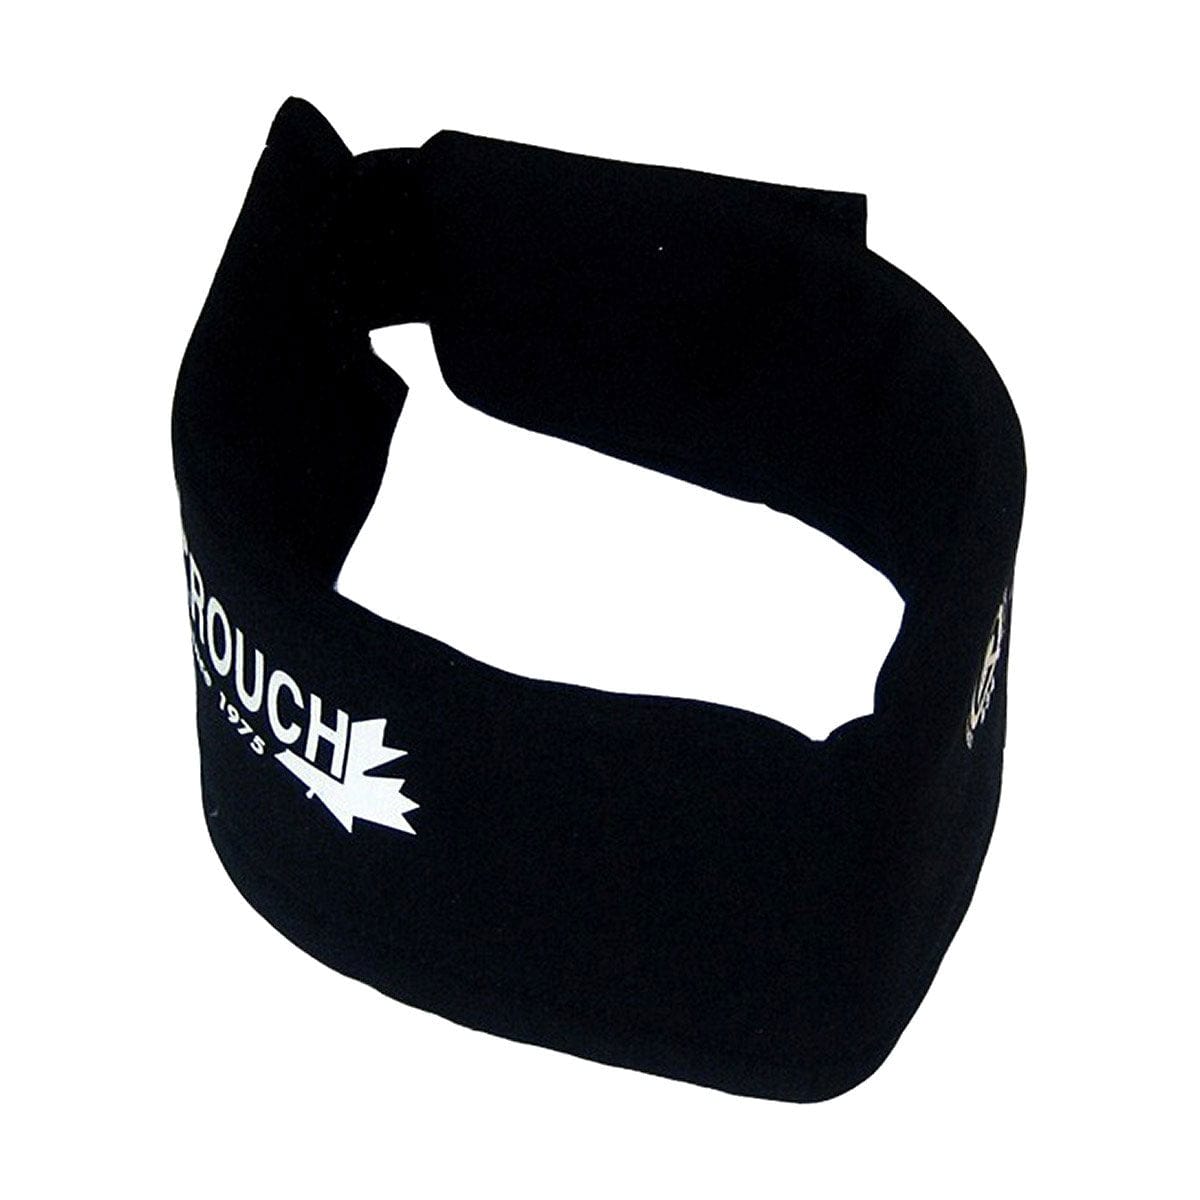 Kim Crouch Band Neck Guard